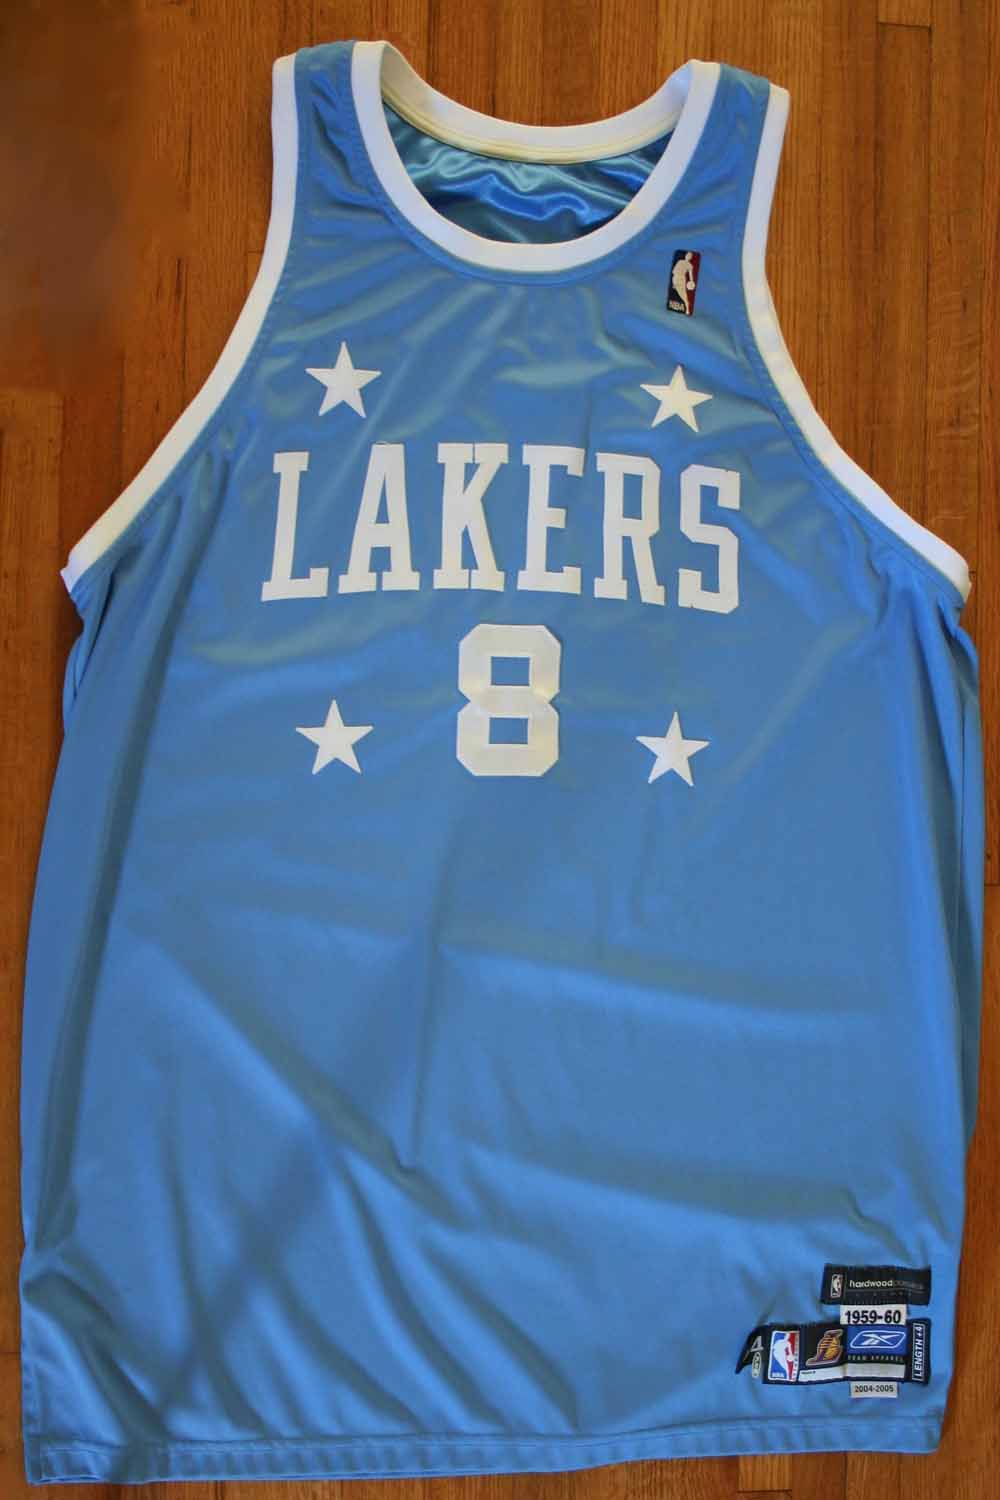 mpls bryant jersey